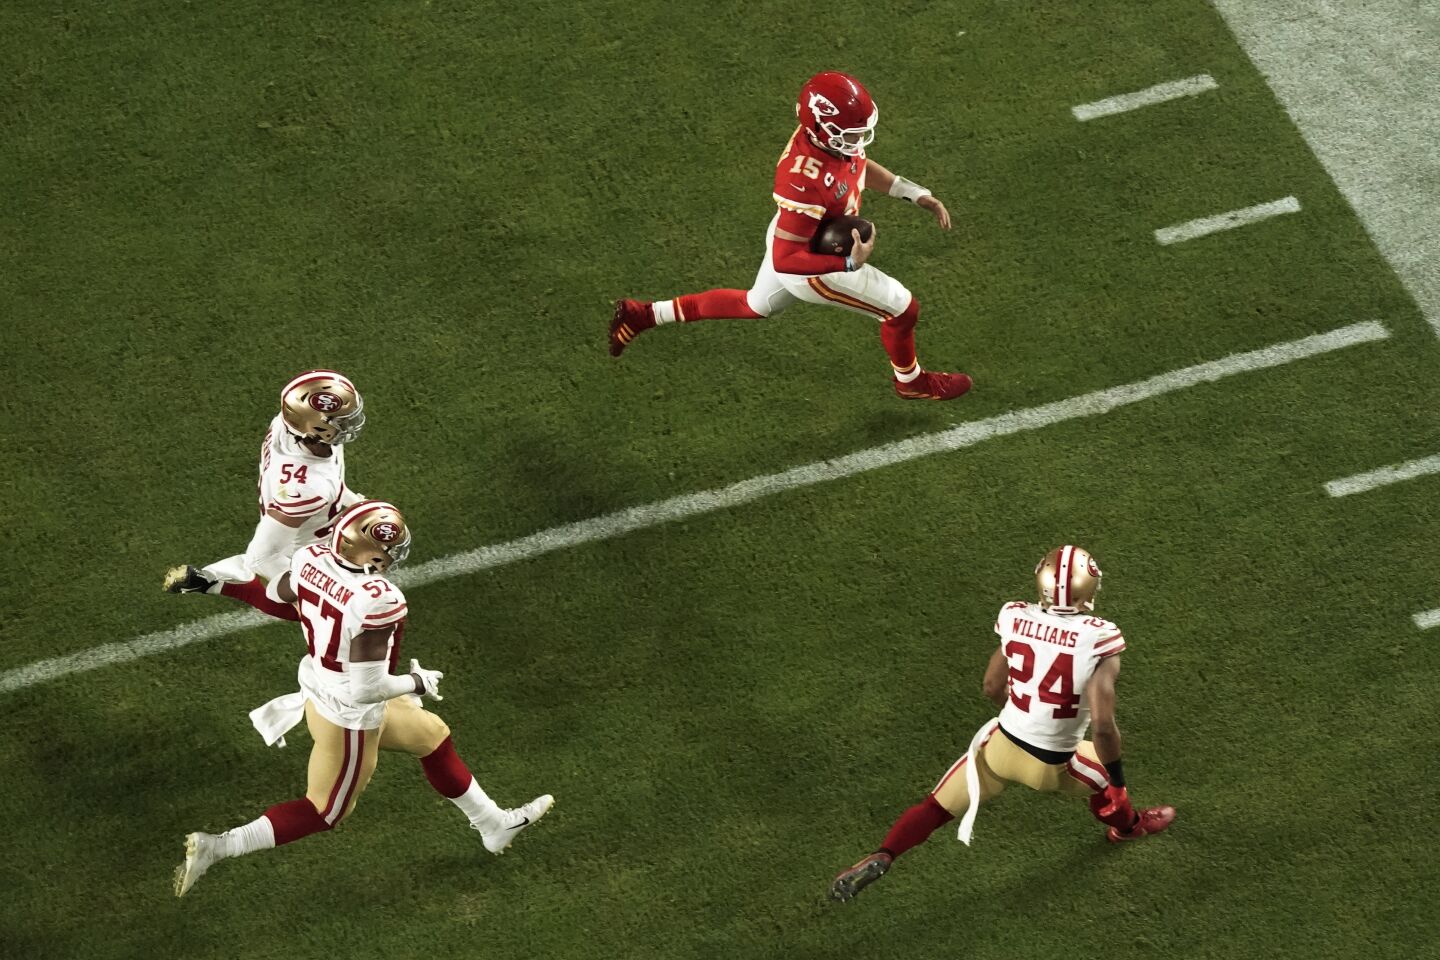 Kansas City Chiefs quarterback Patrick Mahomes, top, is chased by San Francisco 49ers defenders K'Waun Williams (24), Dre Greenlaw (57), and Fred Warner (54) during the second half of Super Bowl LIV.